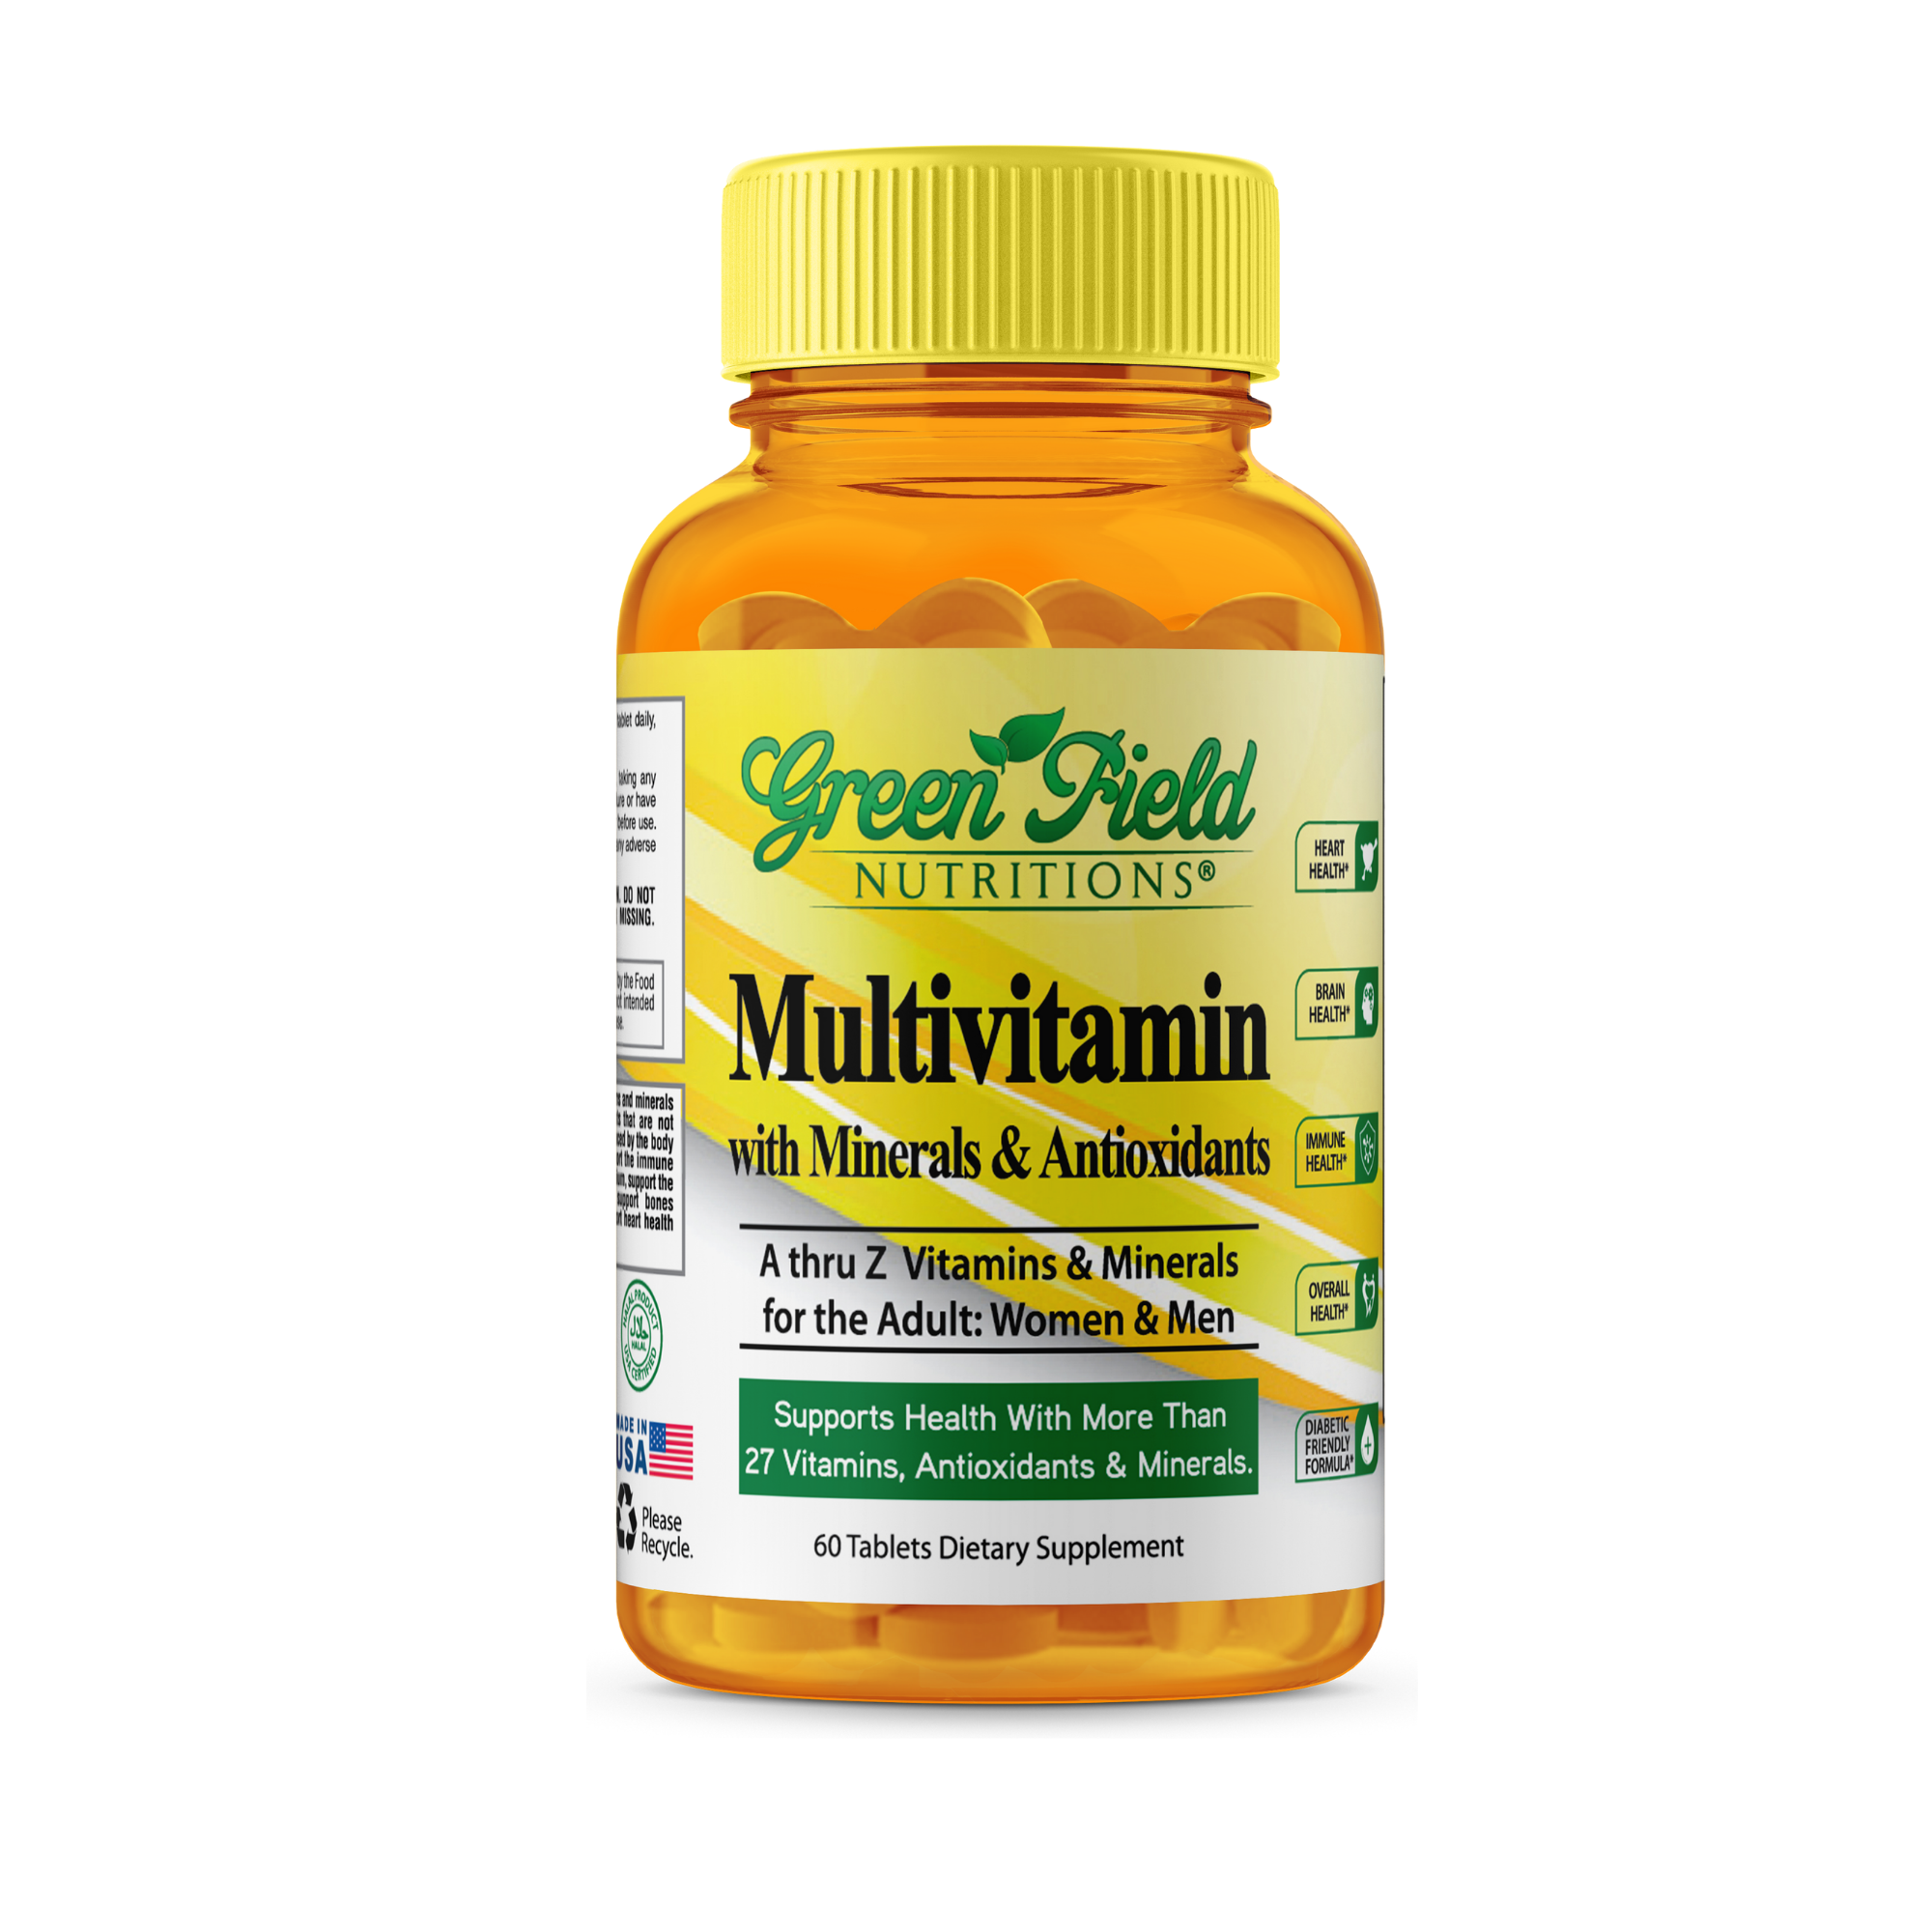 Greenfield Nutritions - Halal Multivitamin with Minerals for Women and Men (Gelatin Free) - 60 Tablets Halal Vitamins